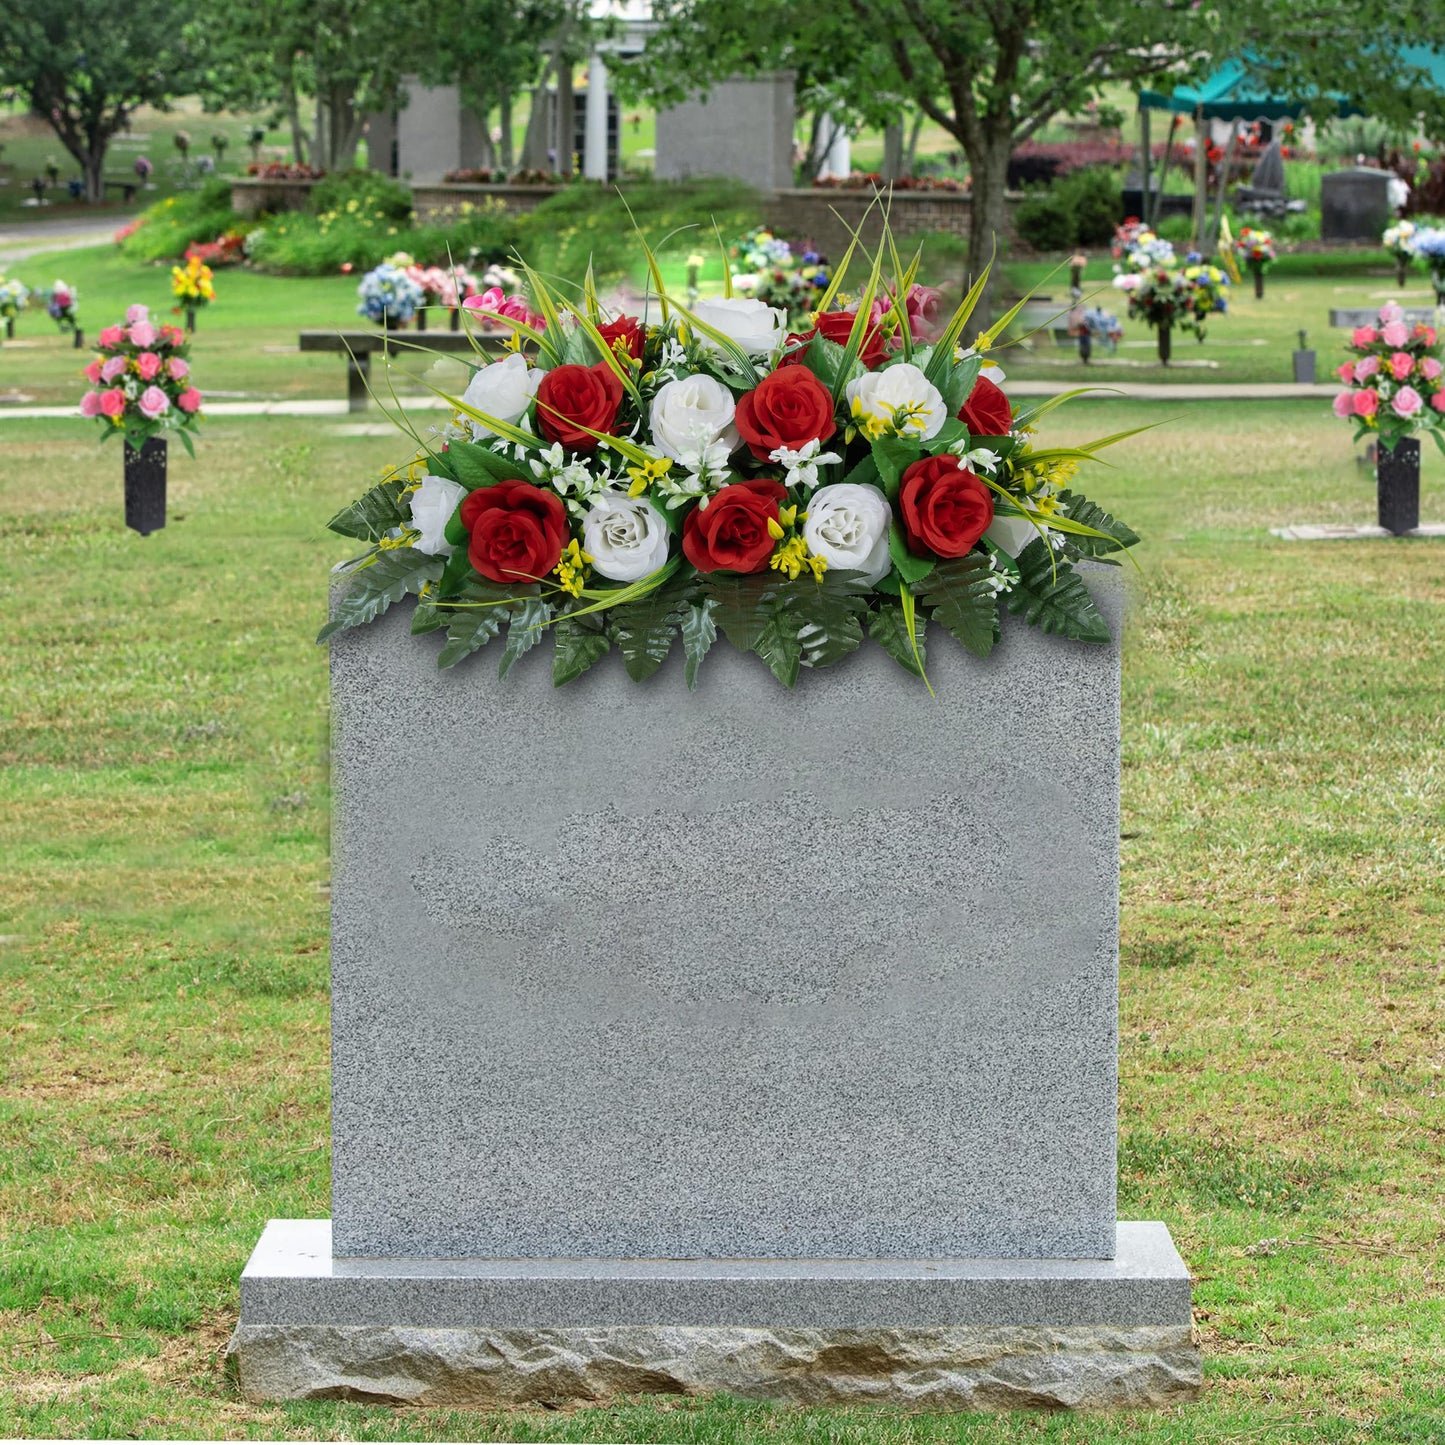 MOOMASS Cemetery Headstone Flower Saddle - Artificial Cemetery Flowers Rose, Grave Decoration，Non-Bleed Colors, and Easy Fit (Red+White, Saddle)